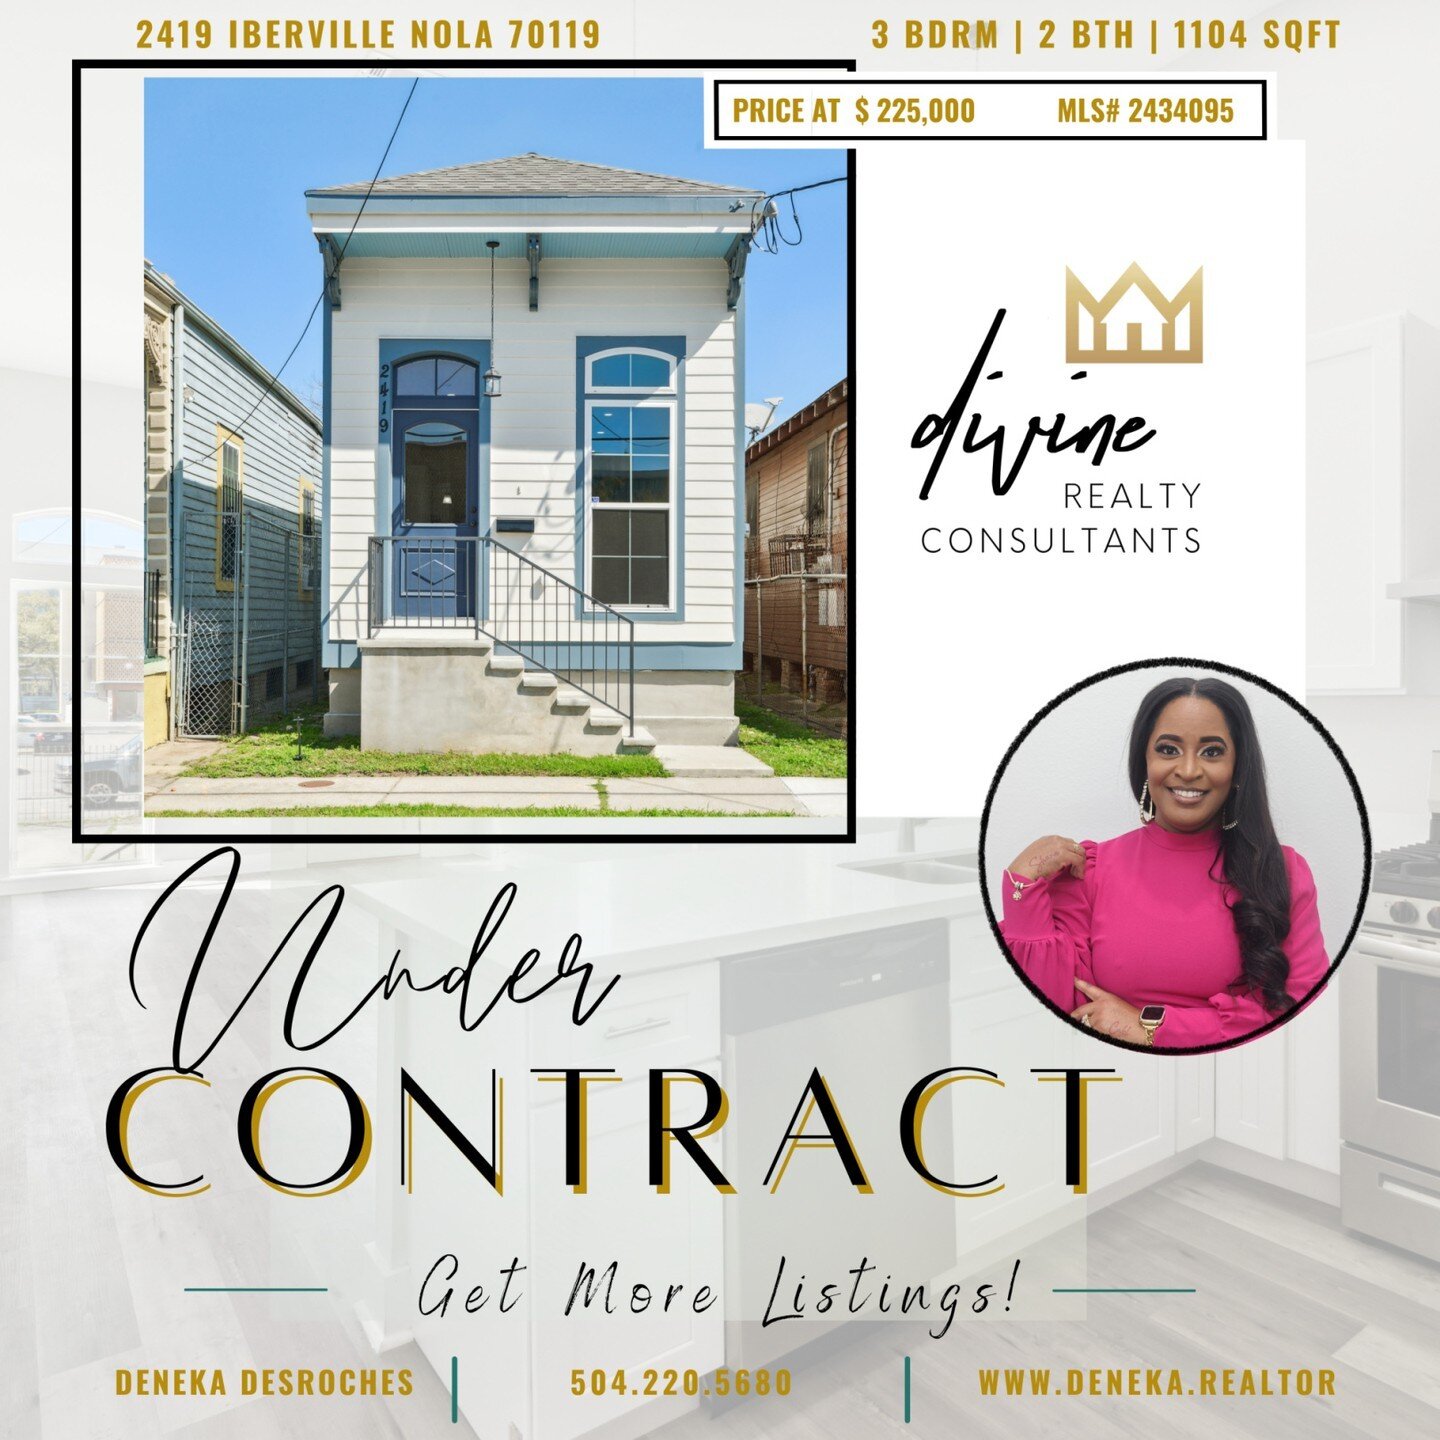 Exciting news! 2419 Iberville is officially under contract, but fear not &ndash; there are plenty more incredible listings waiting for you! 
Call me today to gain access to our exclusive inventory and find your perfect home sweet home. Don't miss out